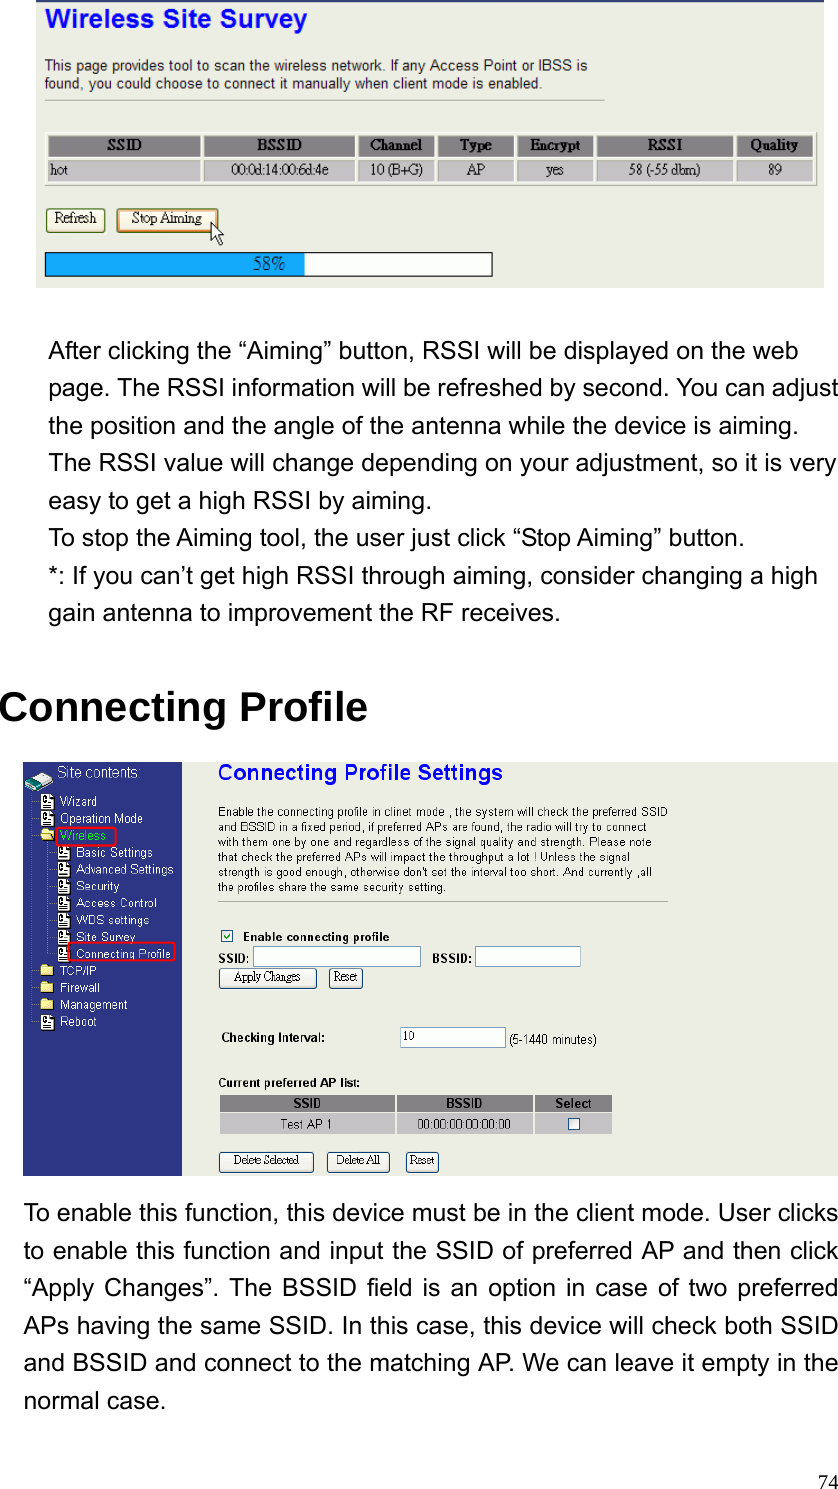  74  After clicking the “Aiming” button, RSSI will be displayed on the web page. The RSSI information will be refreshed by second. You can adjust the position and the angle of the antenna while the device is aiming. The RSSI value will change depending on your adjustment, so it is very easy to get a high RSSI by aiming. To stop the Aiming tool, the user just click “Stop Aiming” button. *: If you can’t get high RSSI through aiming, consider changing a high gain antenna to improvement the RF receives.  Connecting Profile  To enable this function, this device must be in the client mode. User clicks to enable this function and input the SSID of preferred AP and then click “Apply Changes”. The BSSID field is an option in case of two preferred APs having the same SSID. In this case, this device will check both SSID and BSSID and connect to the matching AP. We can leave it empty in the normal case. 